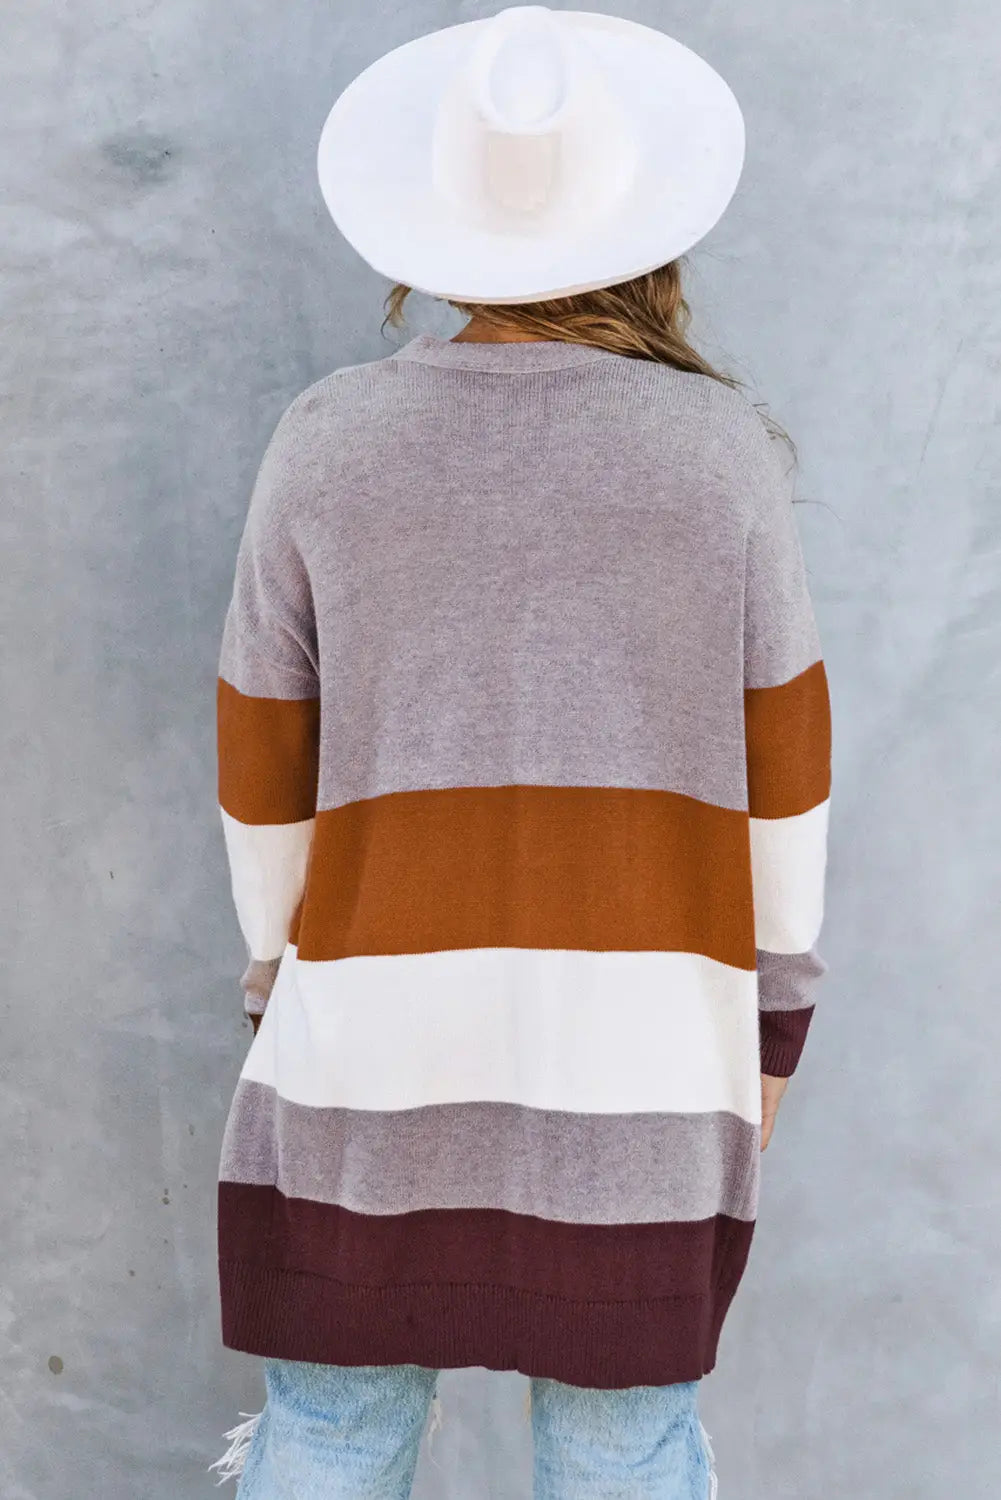 Khaki open front colorblock cardigan with pockets - sweaters & cardigans